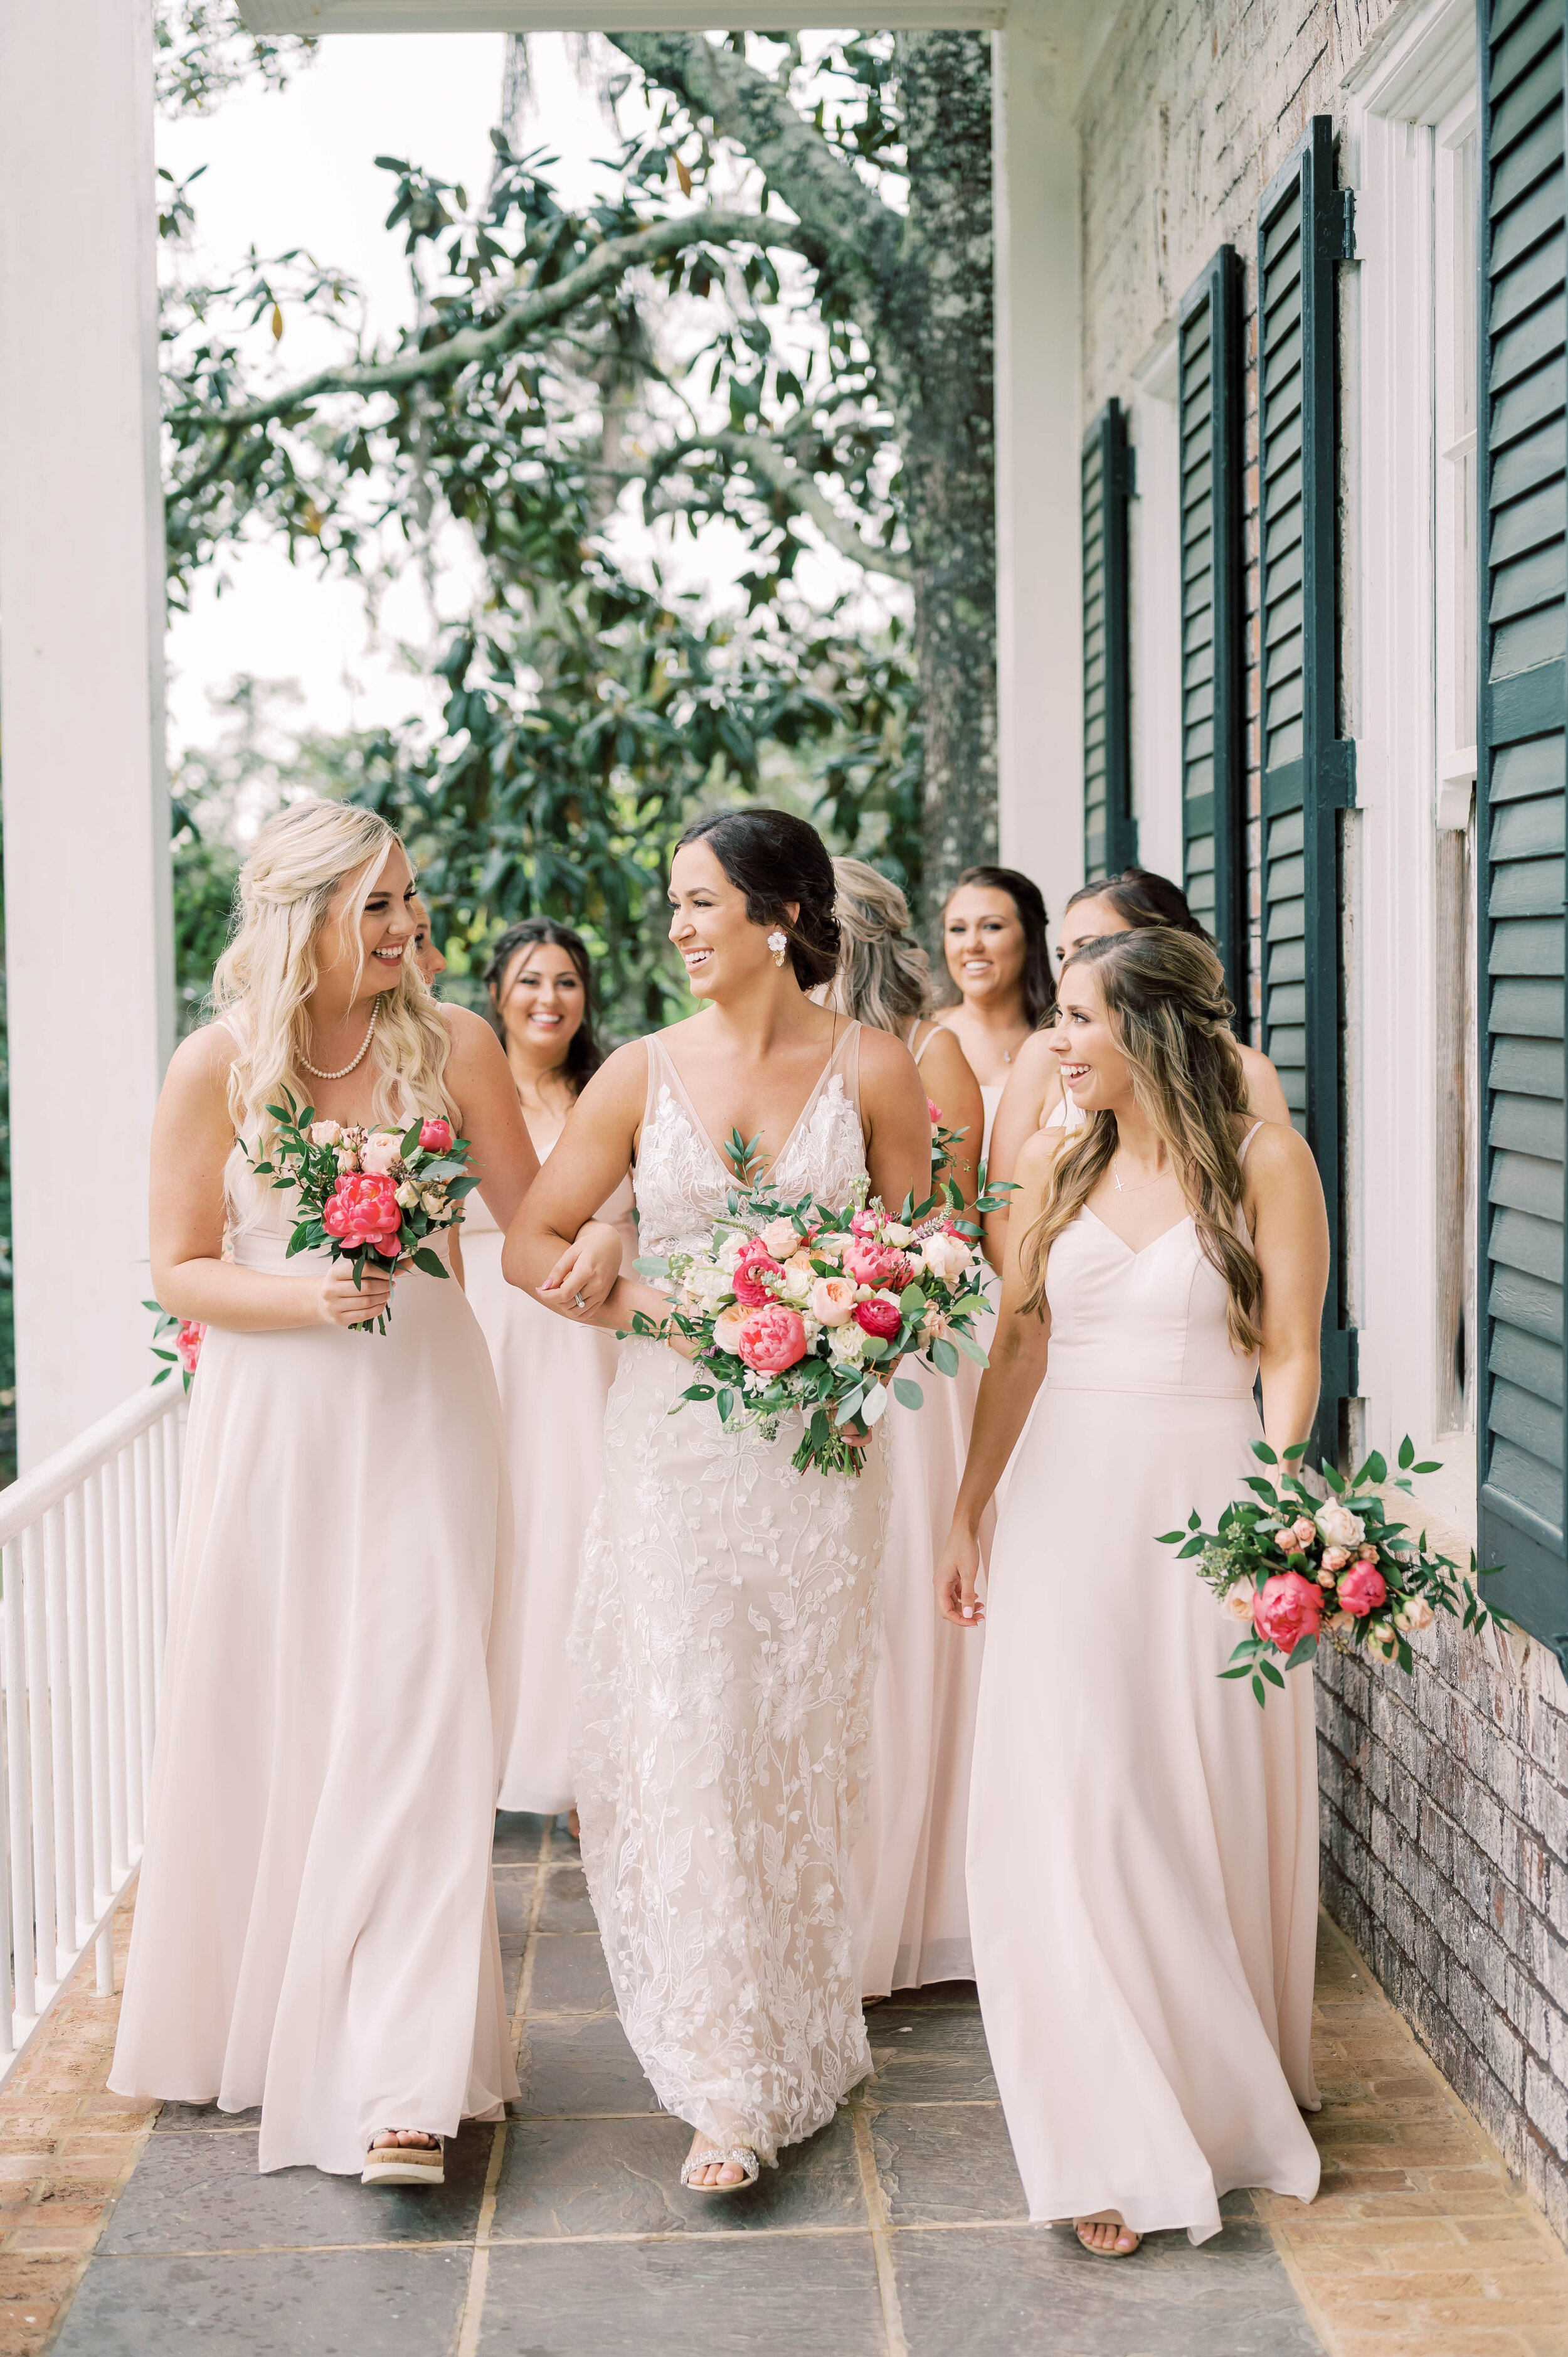 ivory-and-beau-blog-wedding-blog-ivory-and-beau-bride-madison-down-for-the-gown-made-with-love-wedding-dress-bridal-gown-wedding-gown-real-bride-real-wedding-bridal-shop-savannah-georgia-21Madison.Blake-429.jpg